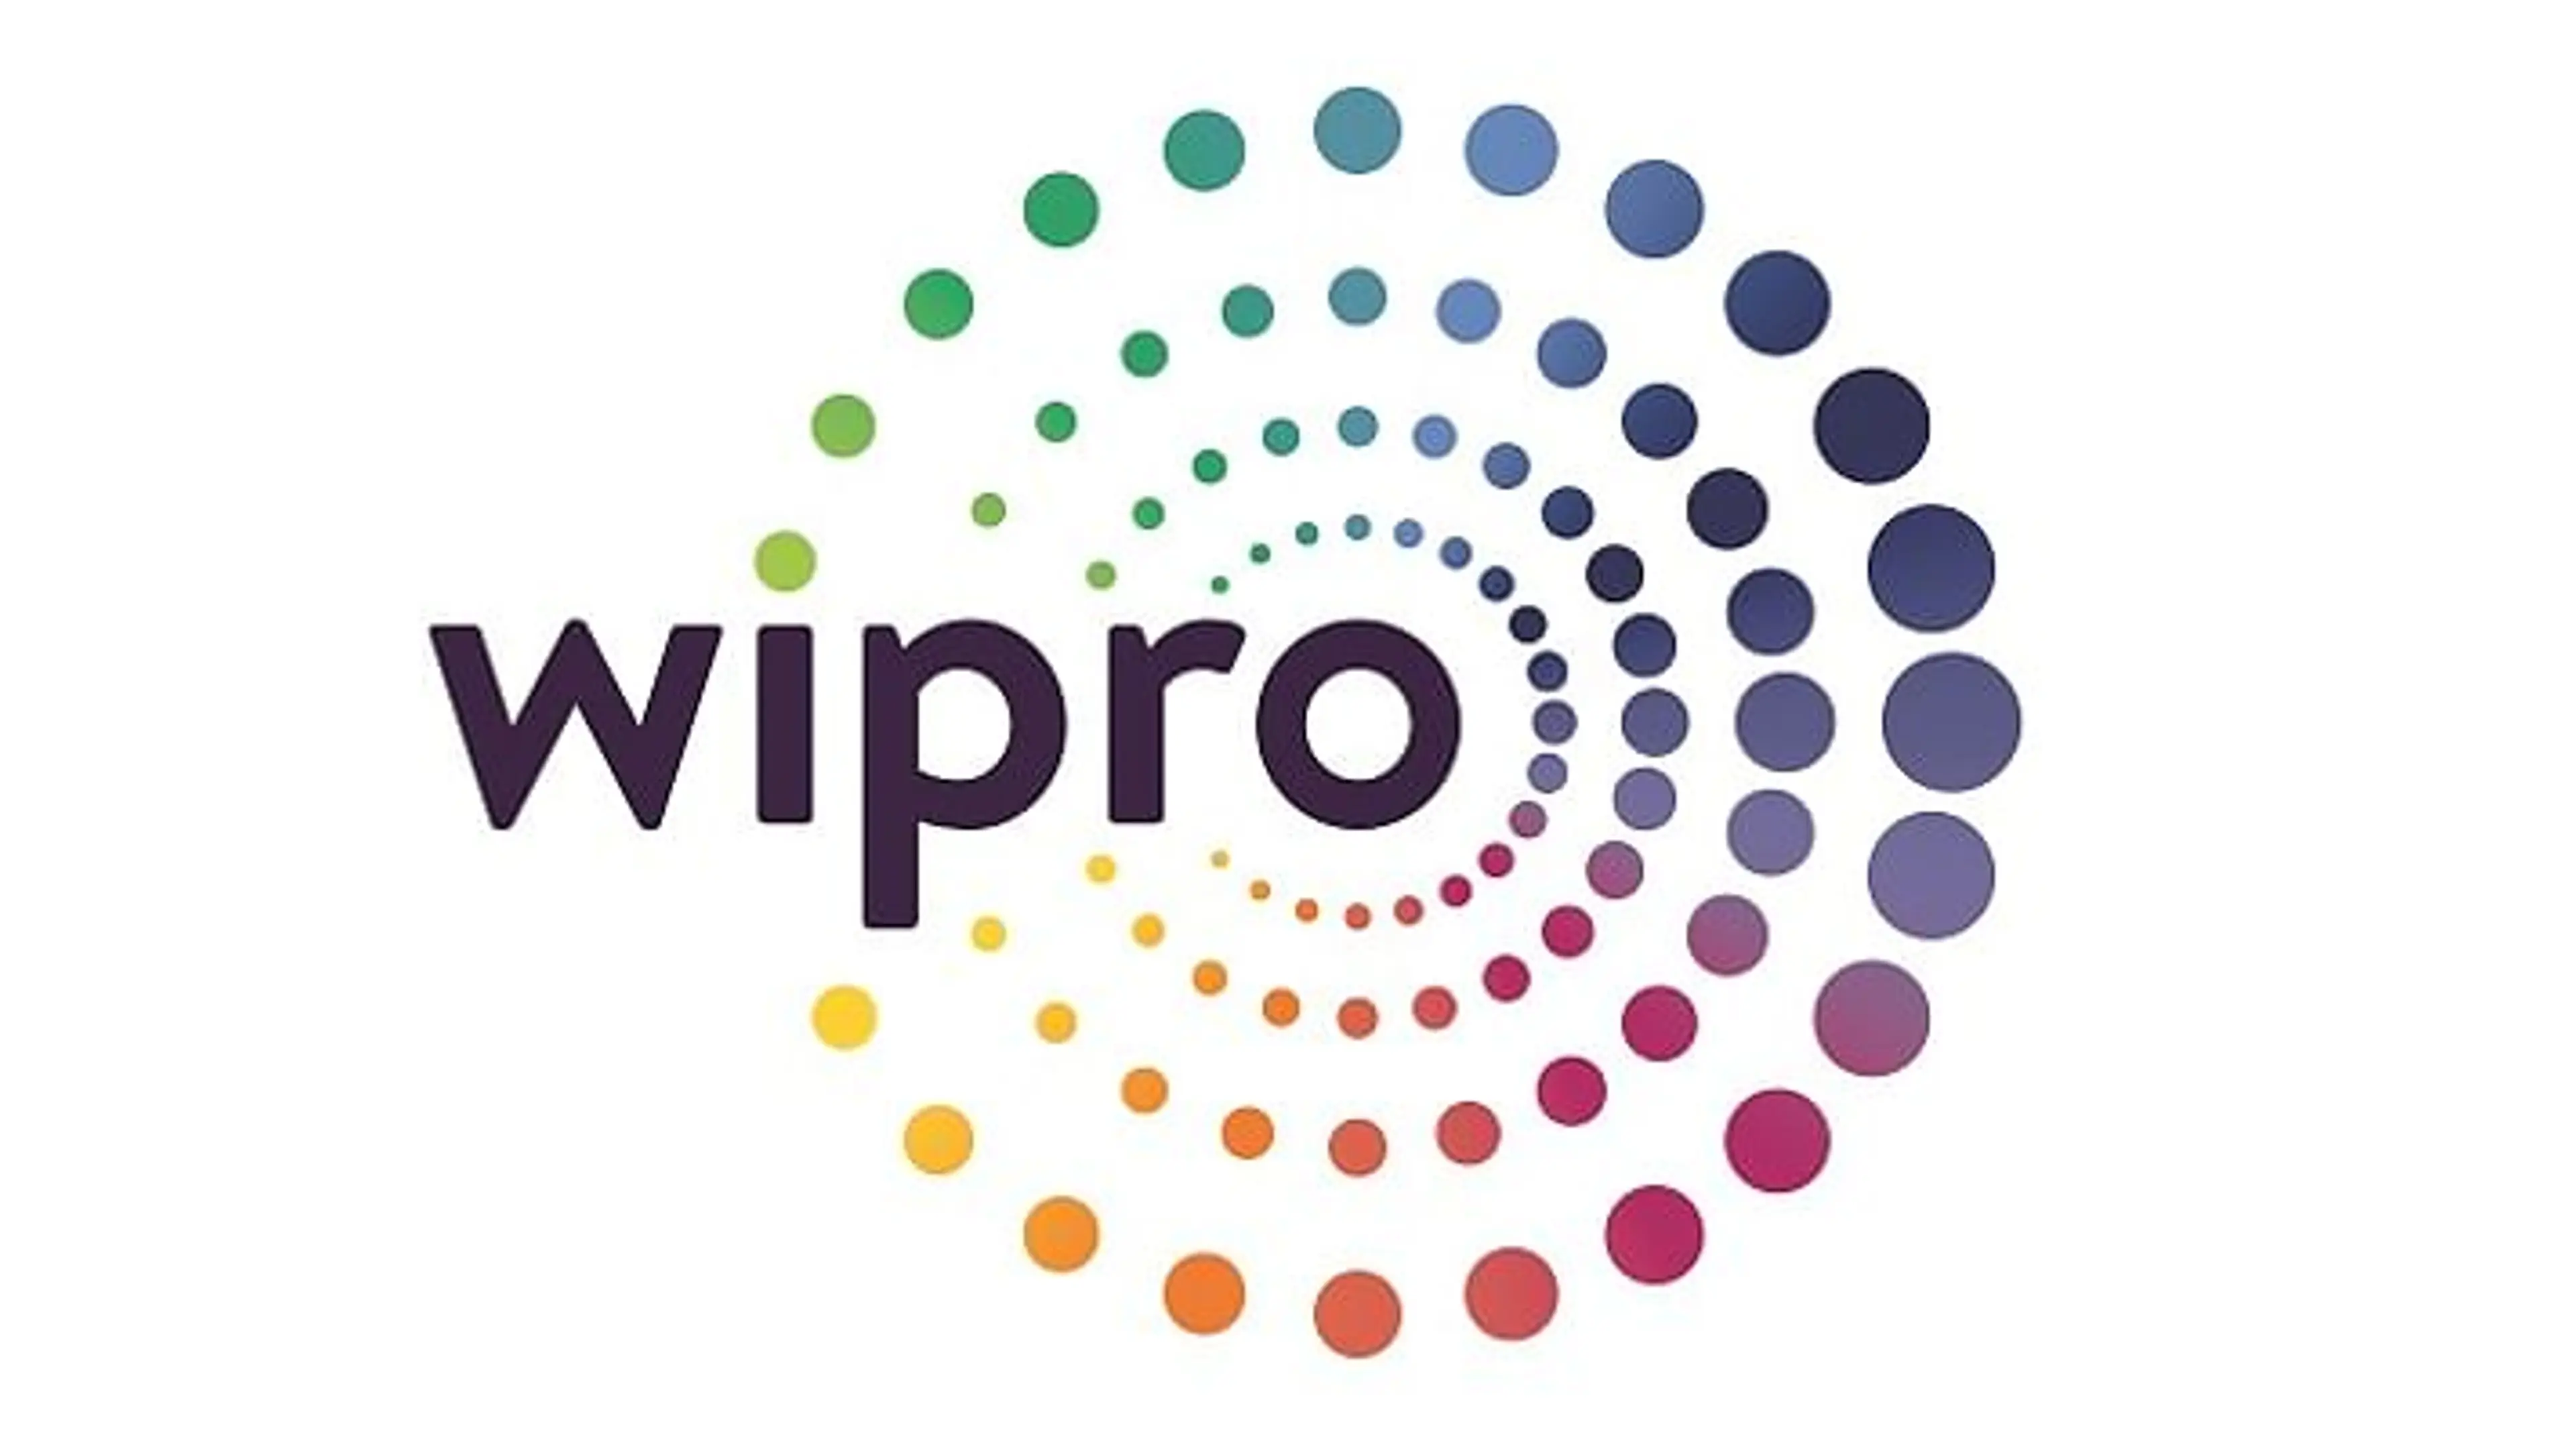 Wipro appoints Sanjeev Jain as new COO

